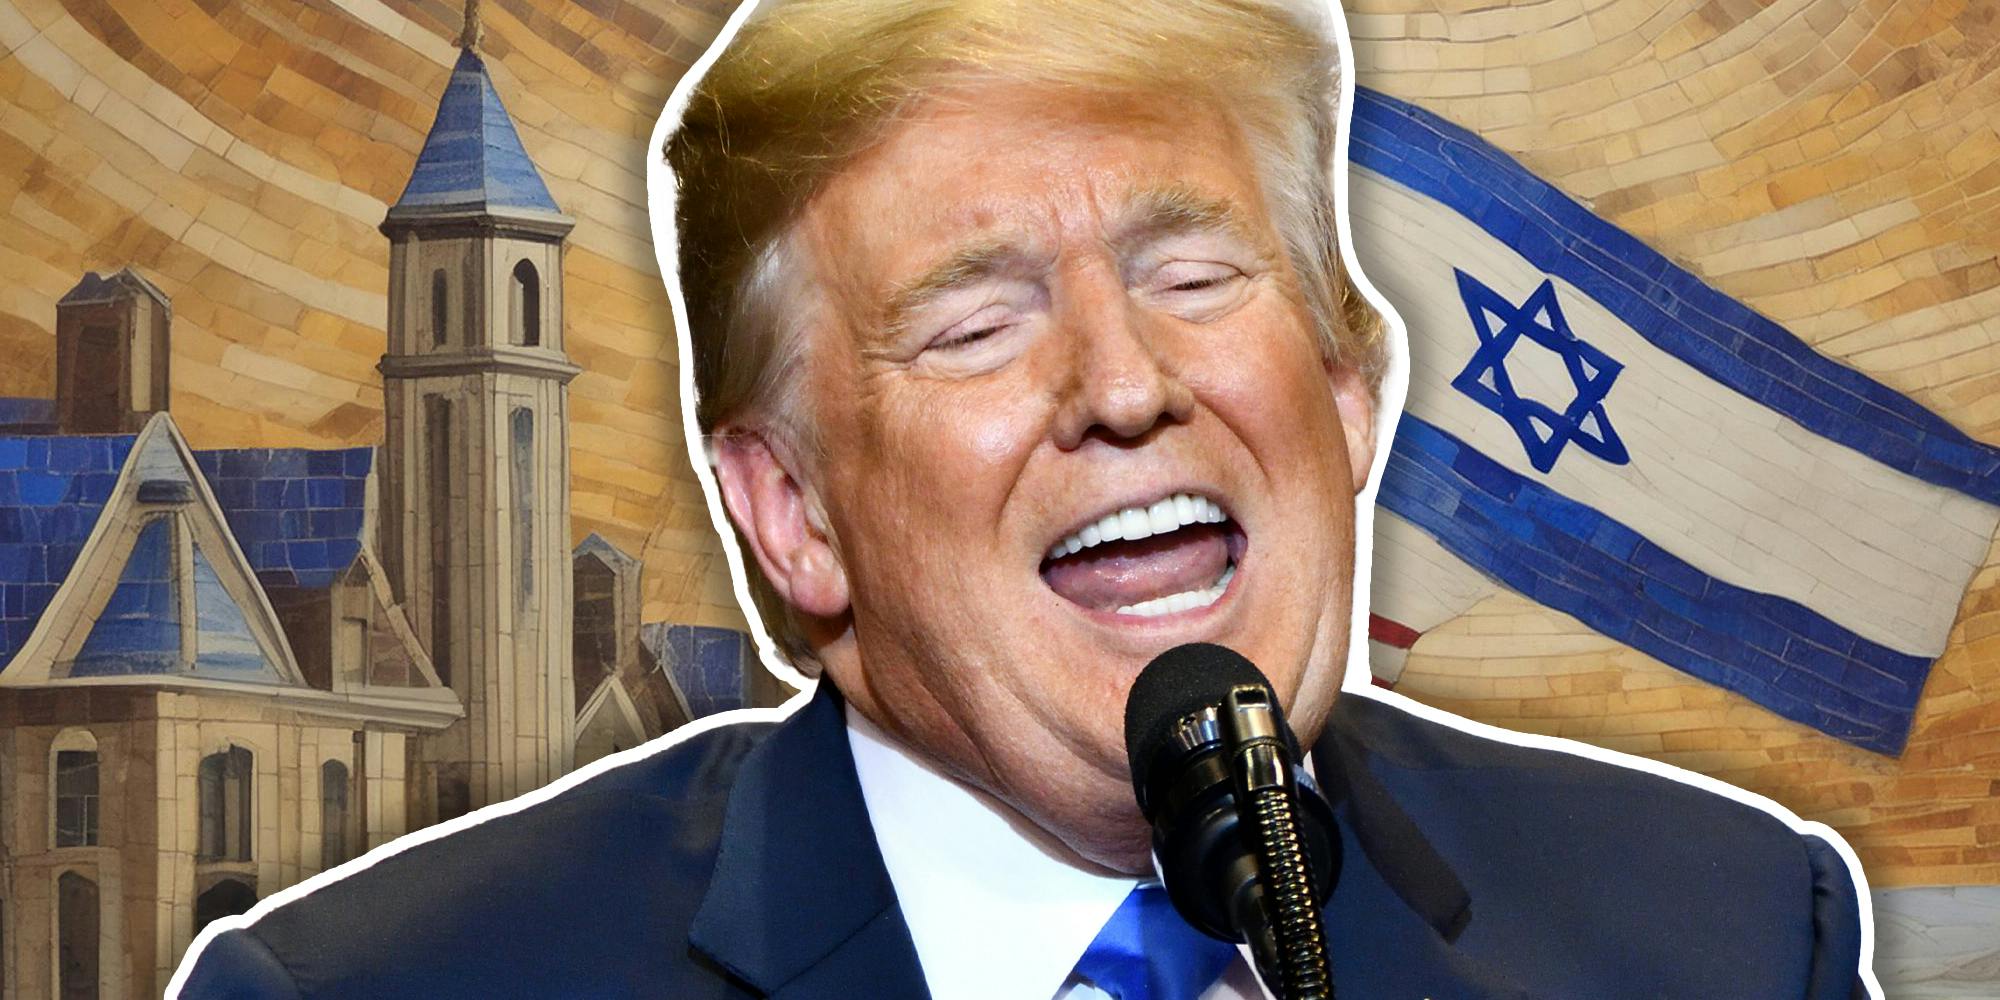 Donald Trump yelling in front of israeli flag